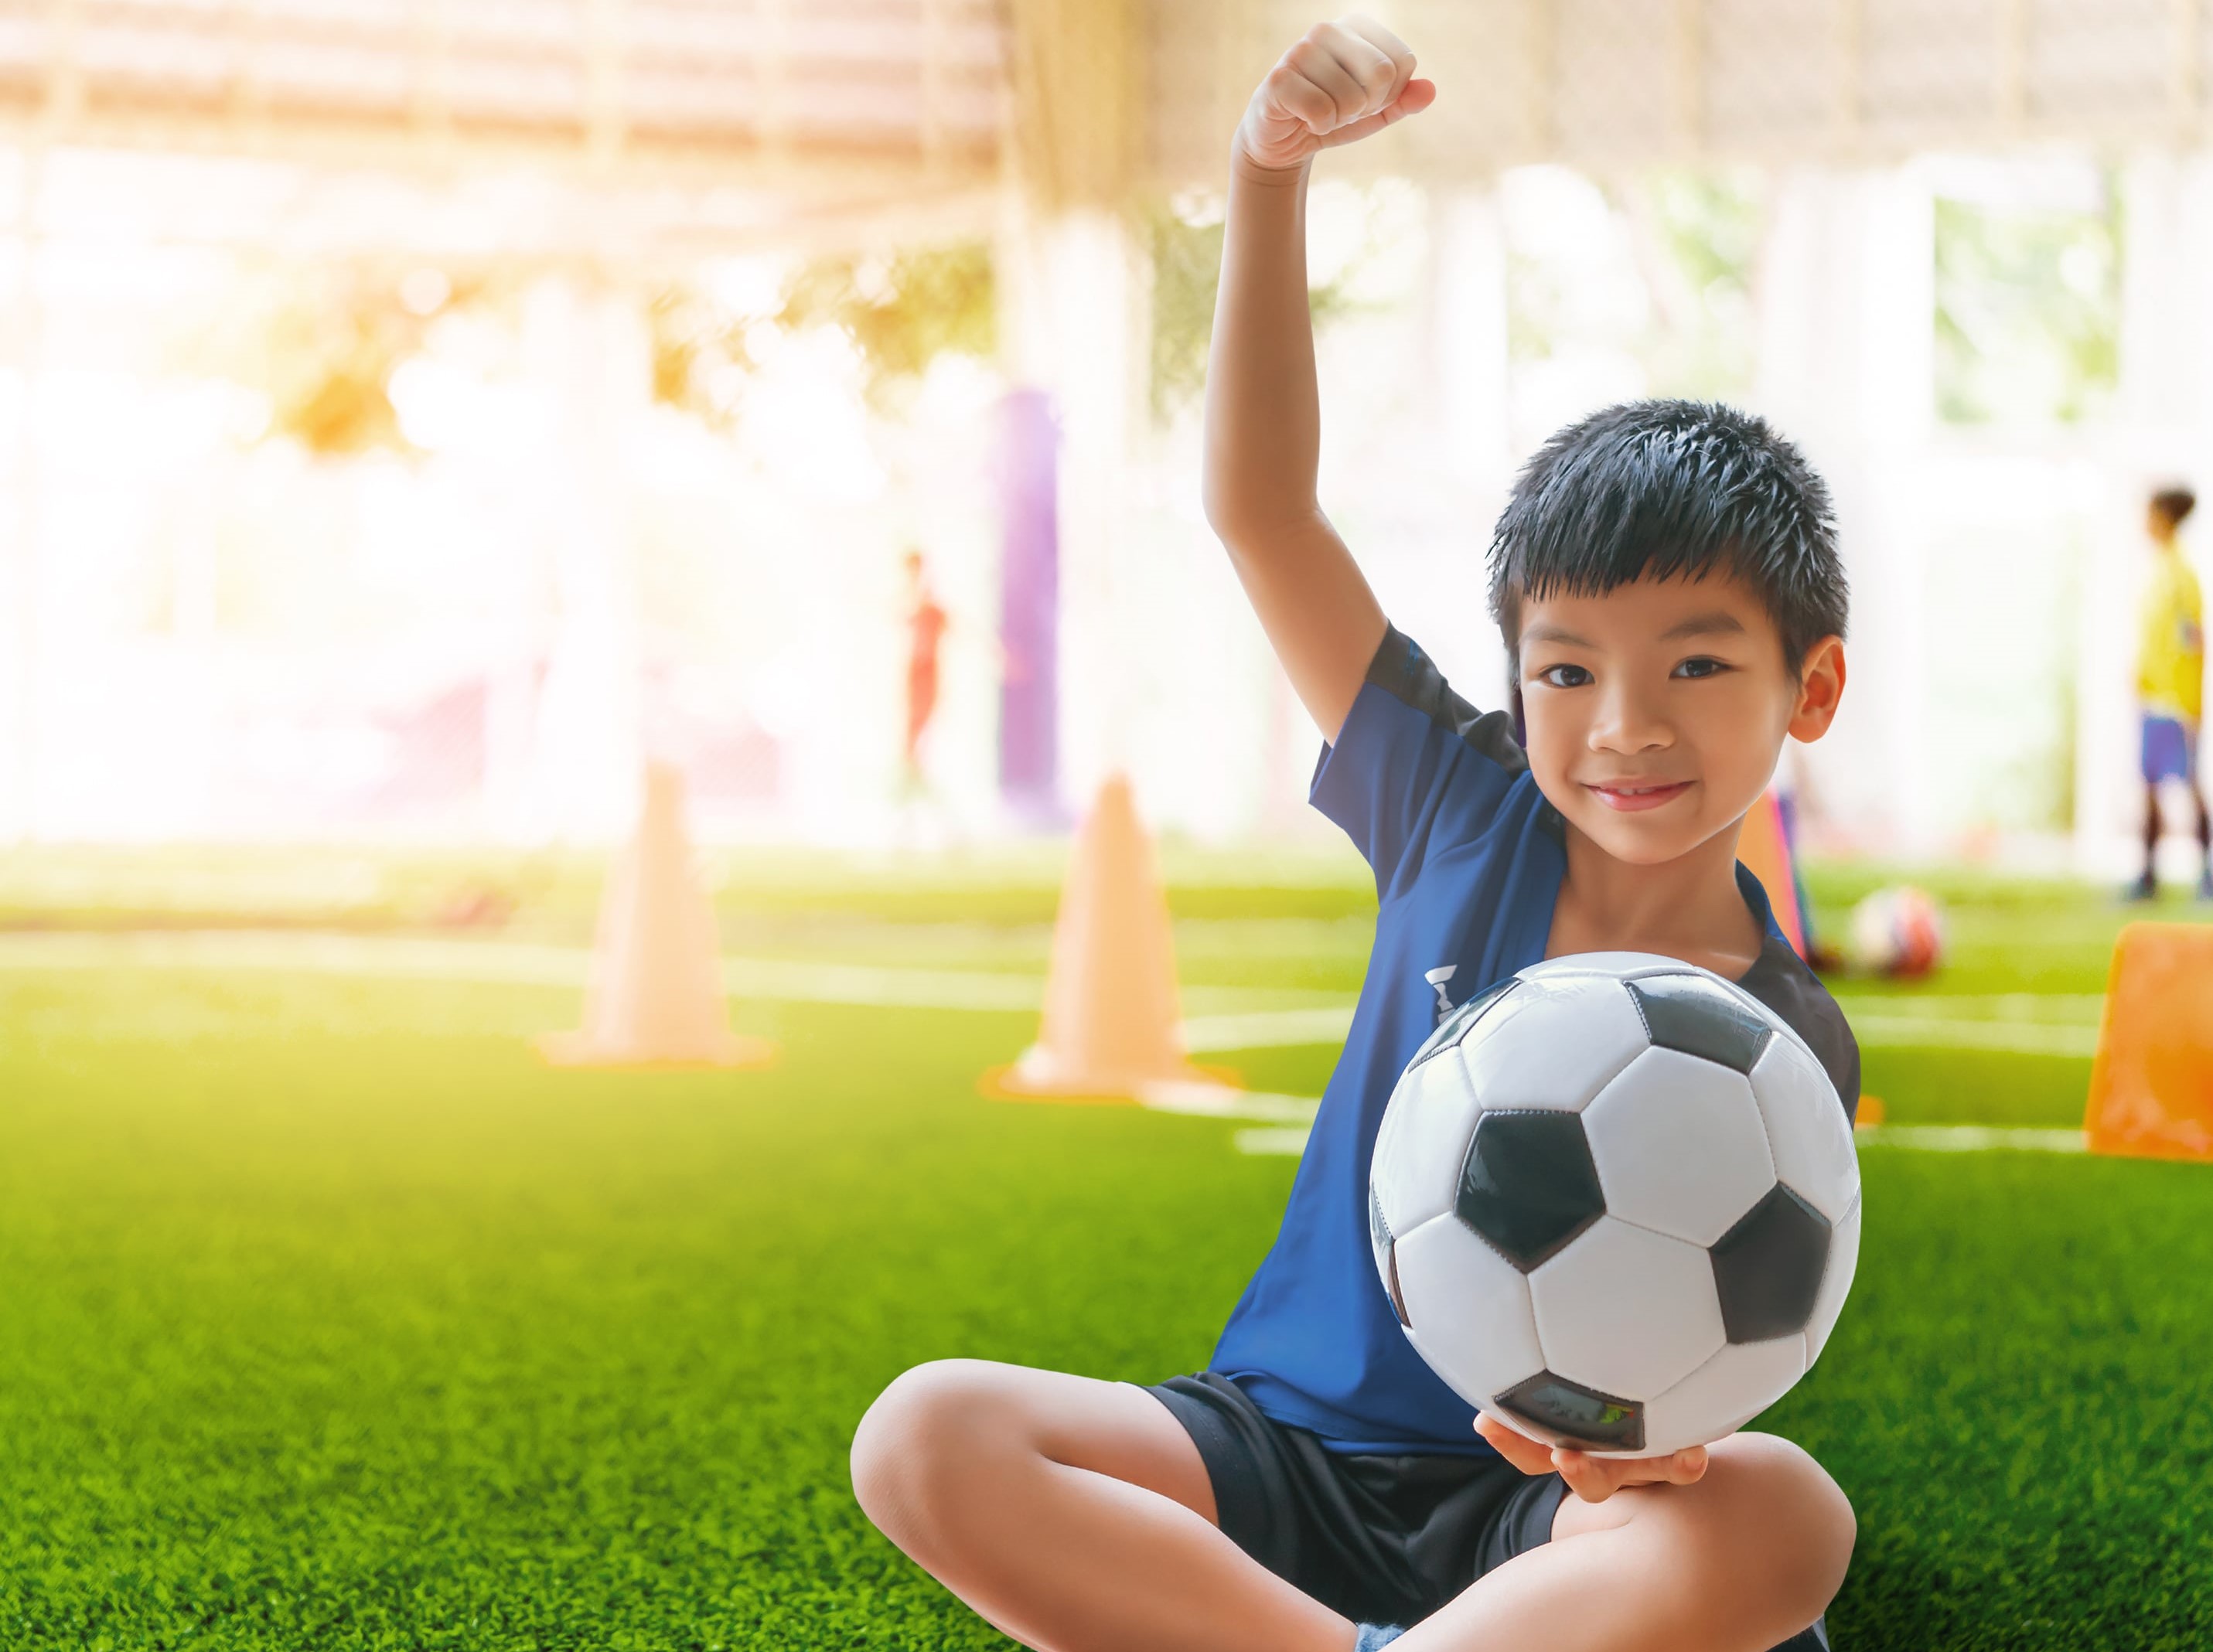 Find your child’s sporting passion